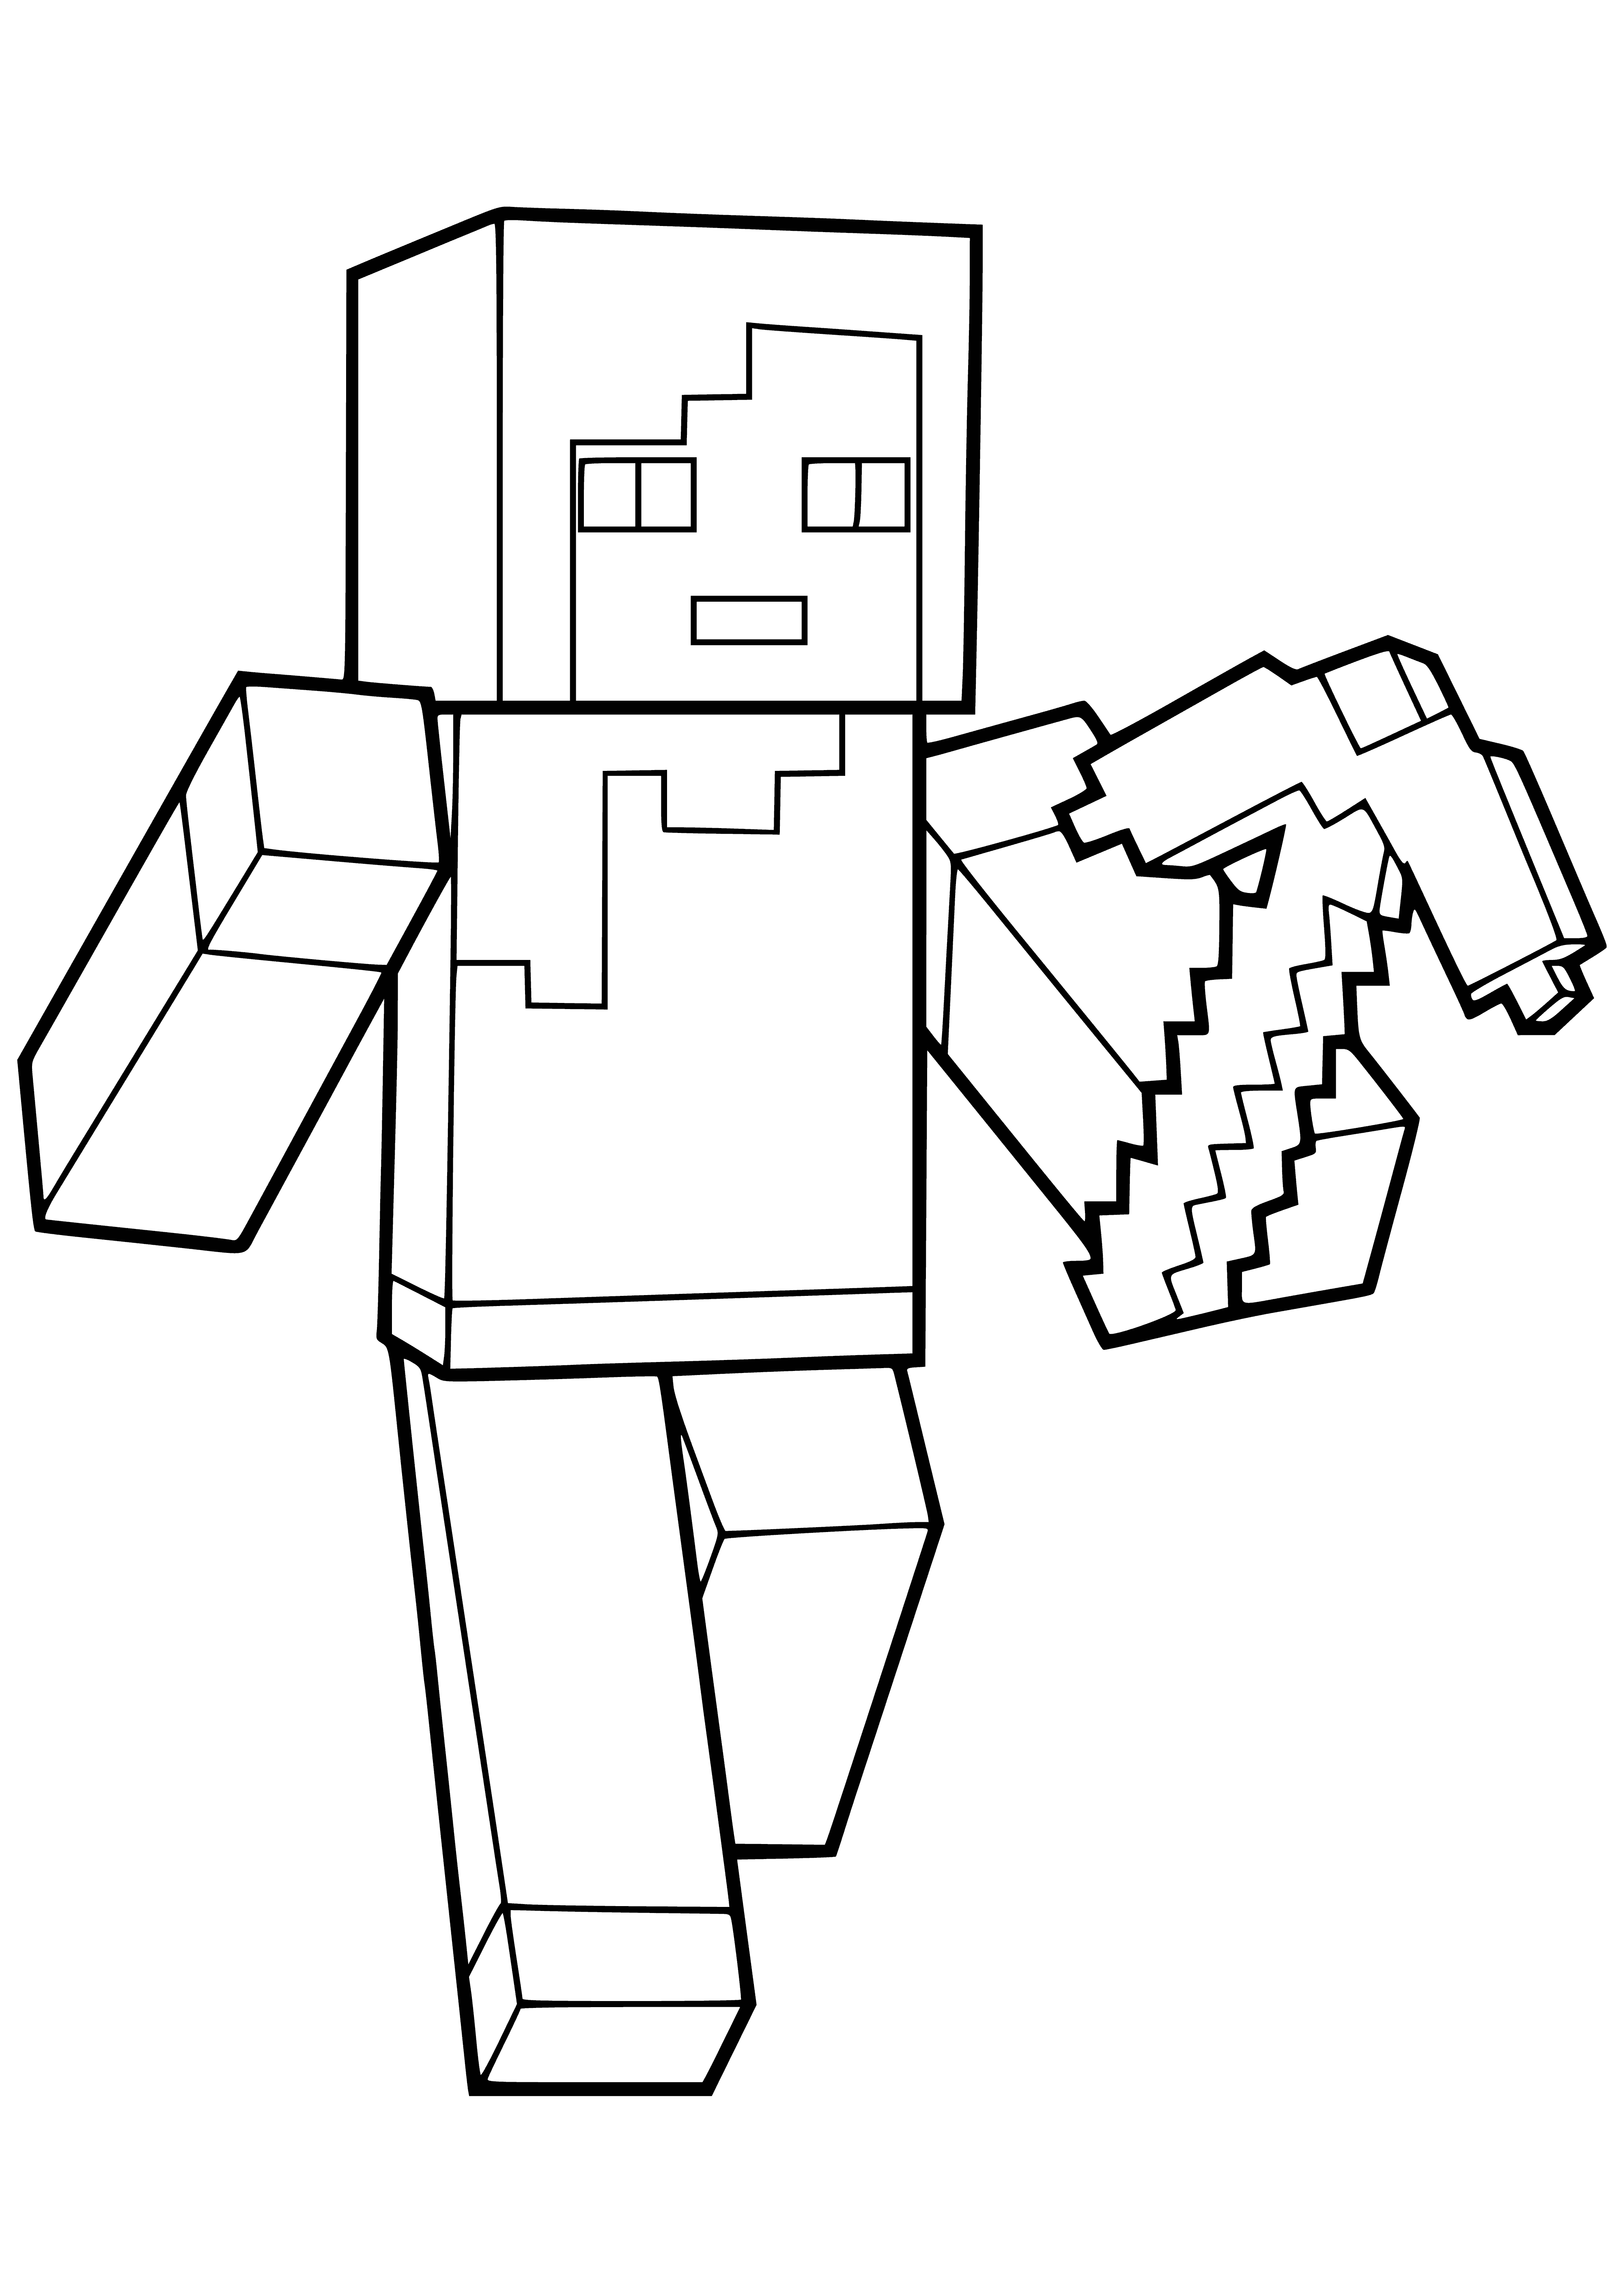 Alex with a pickaxe coloring page